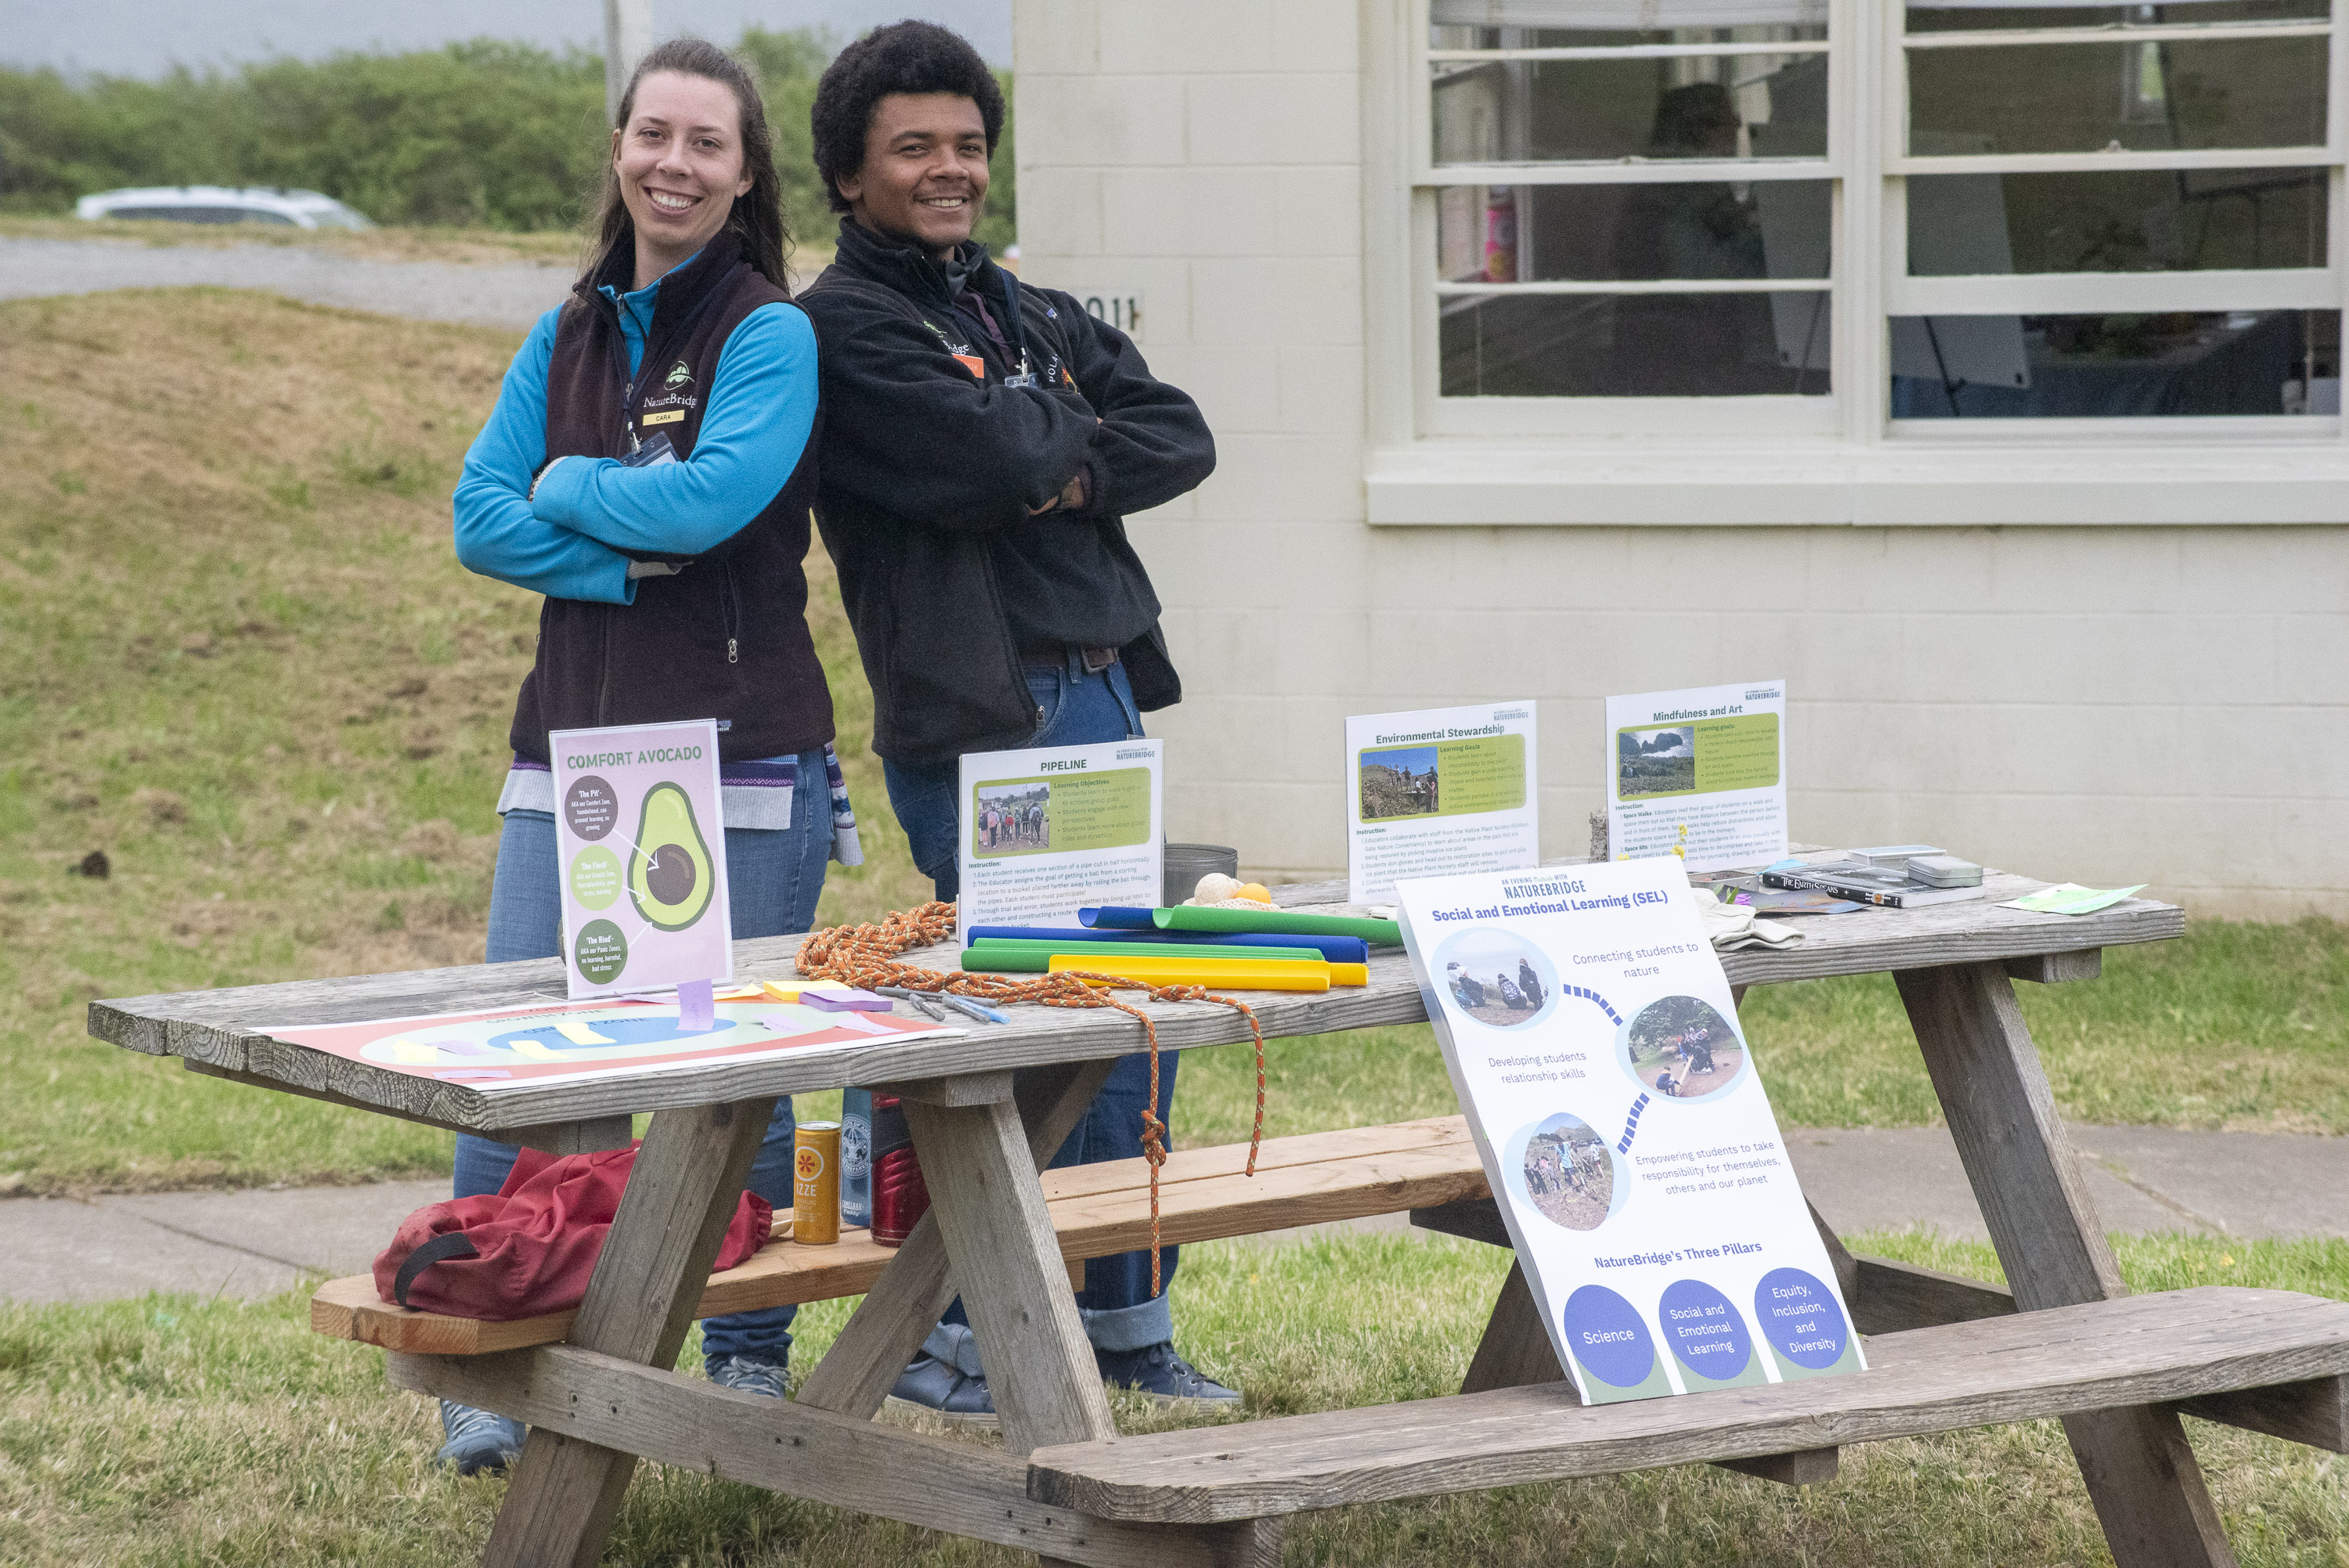 Two NatureBridge educators standing behind a wooden picnic table covered with learning materials